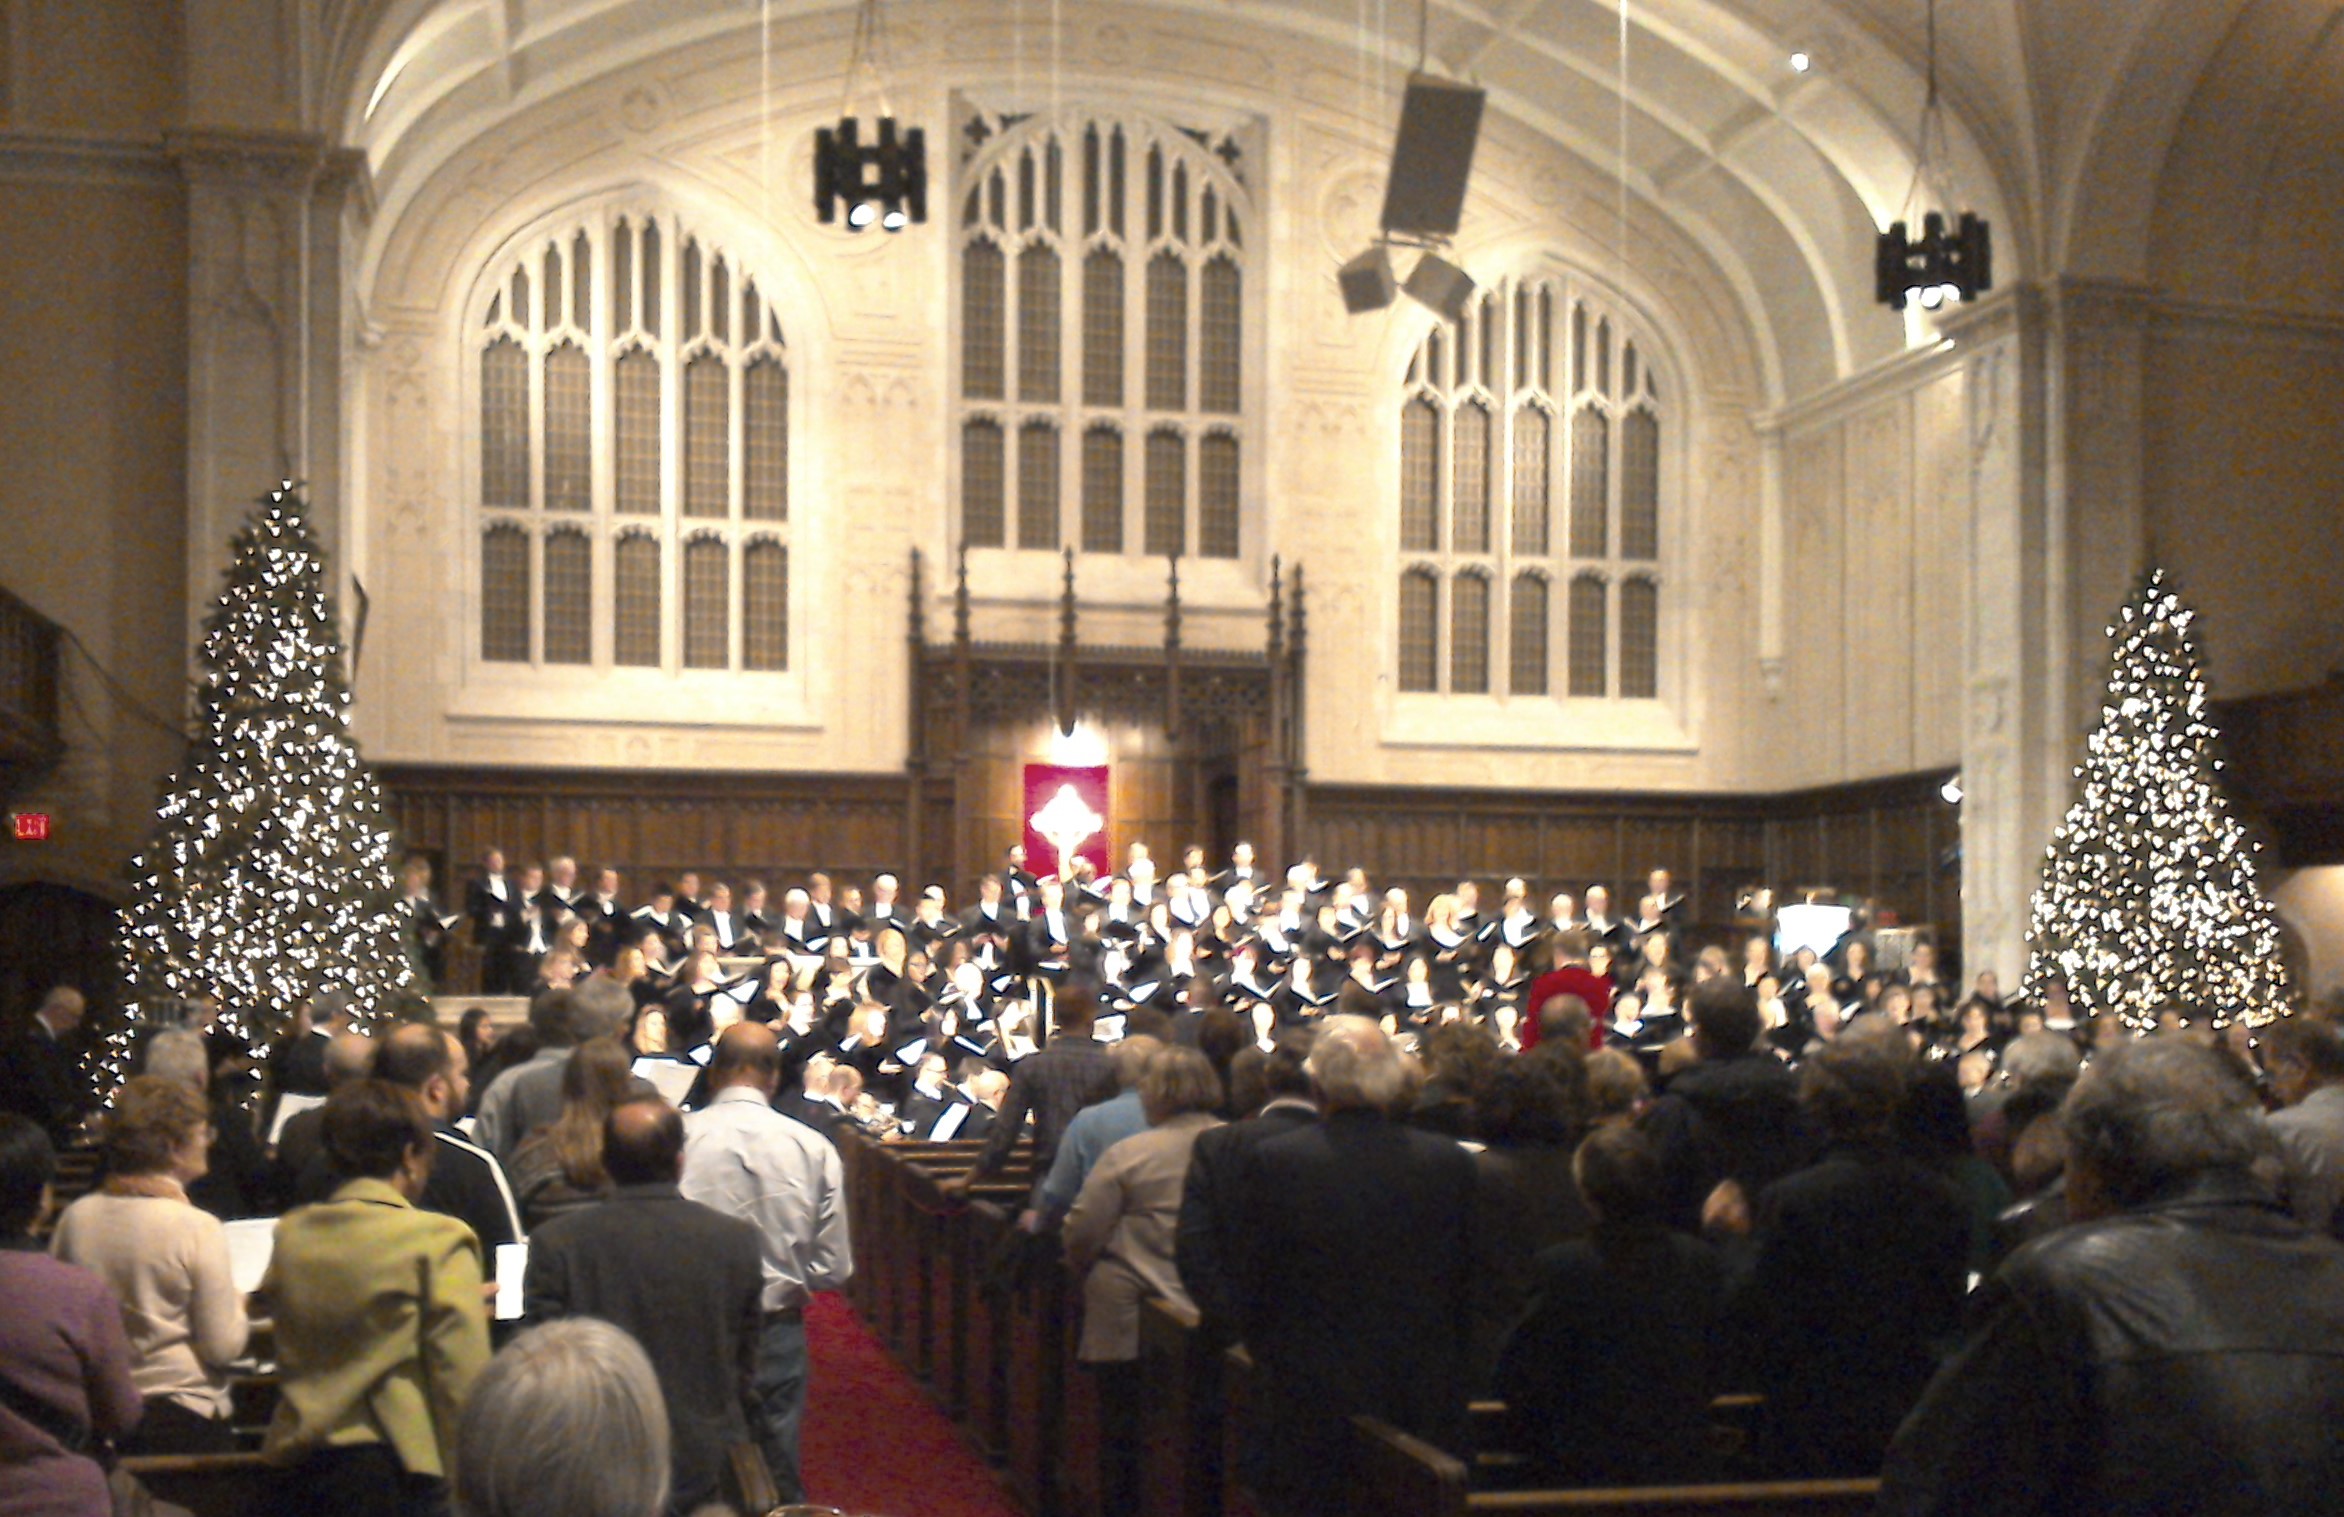 An audience-eye view of the sanctuary of Yorkminster Park Baptist Church, with the choir at the front of the church and rows of audience members in the foreground.